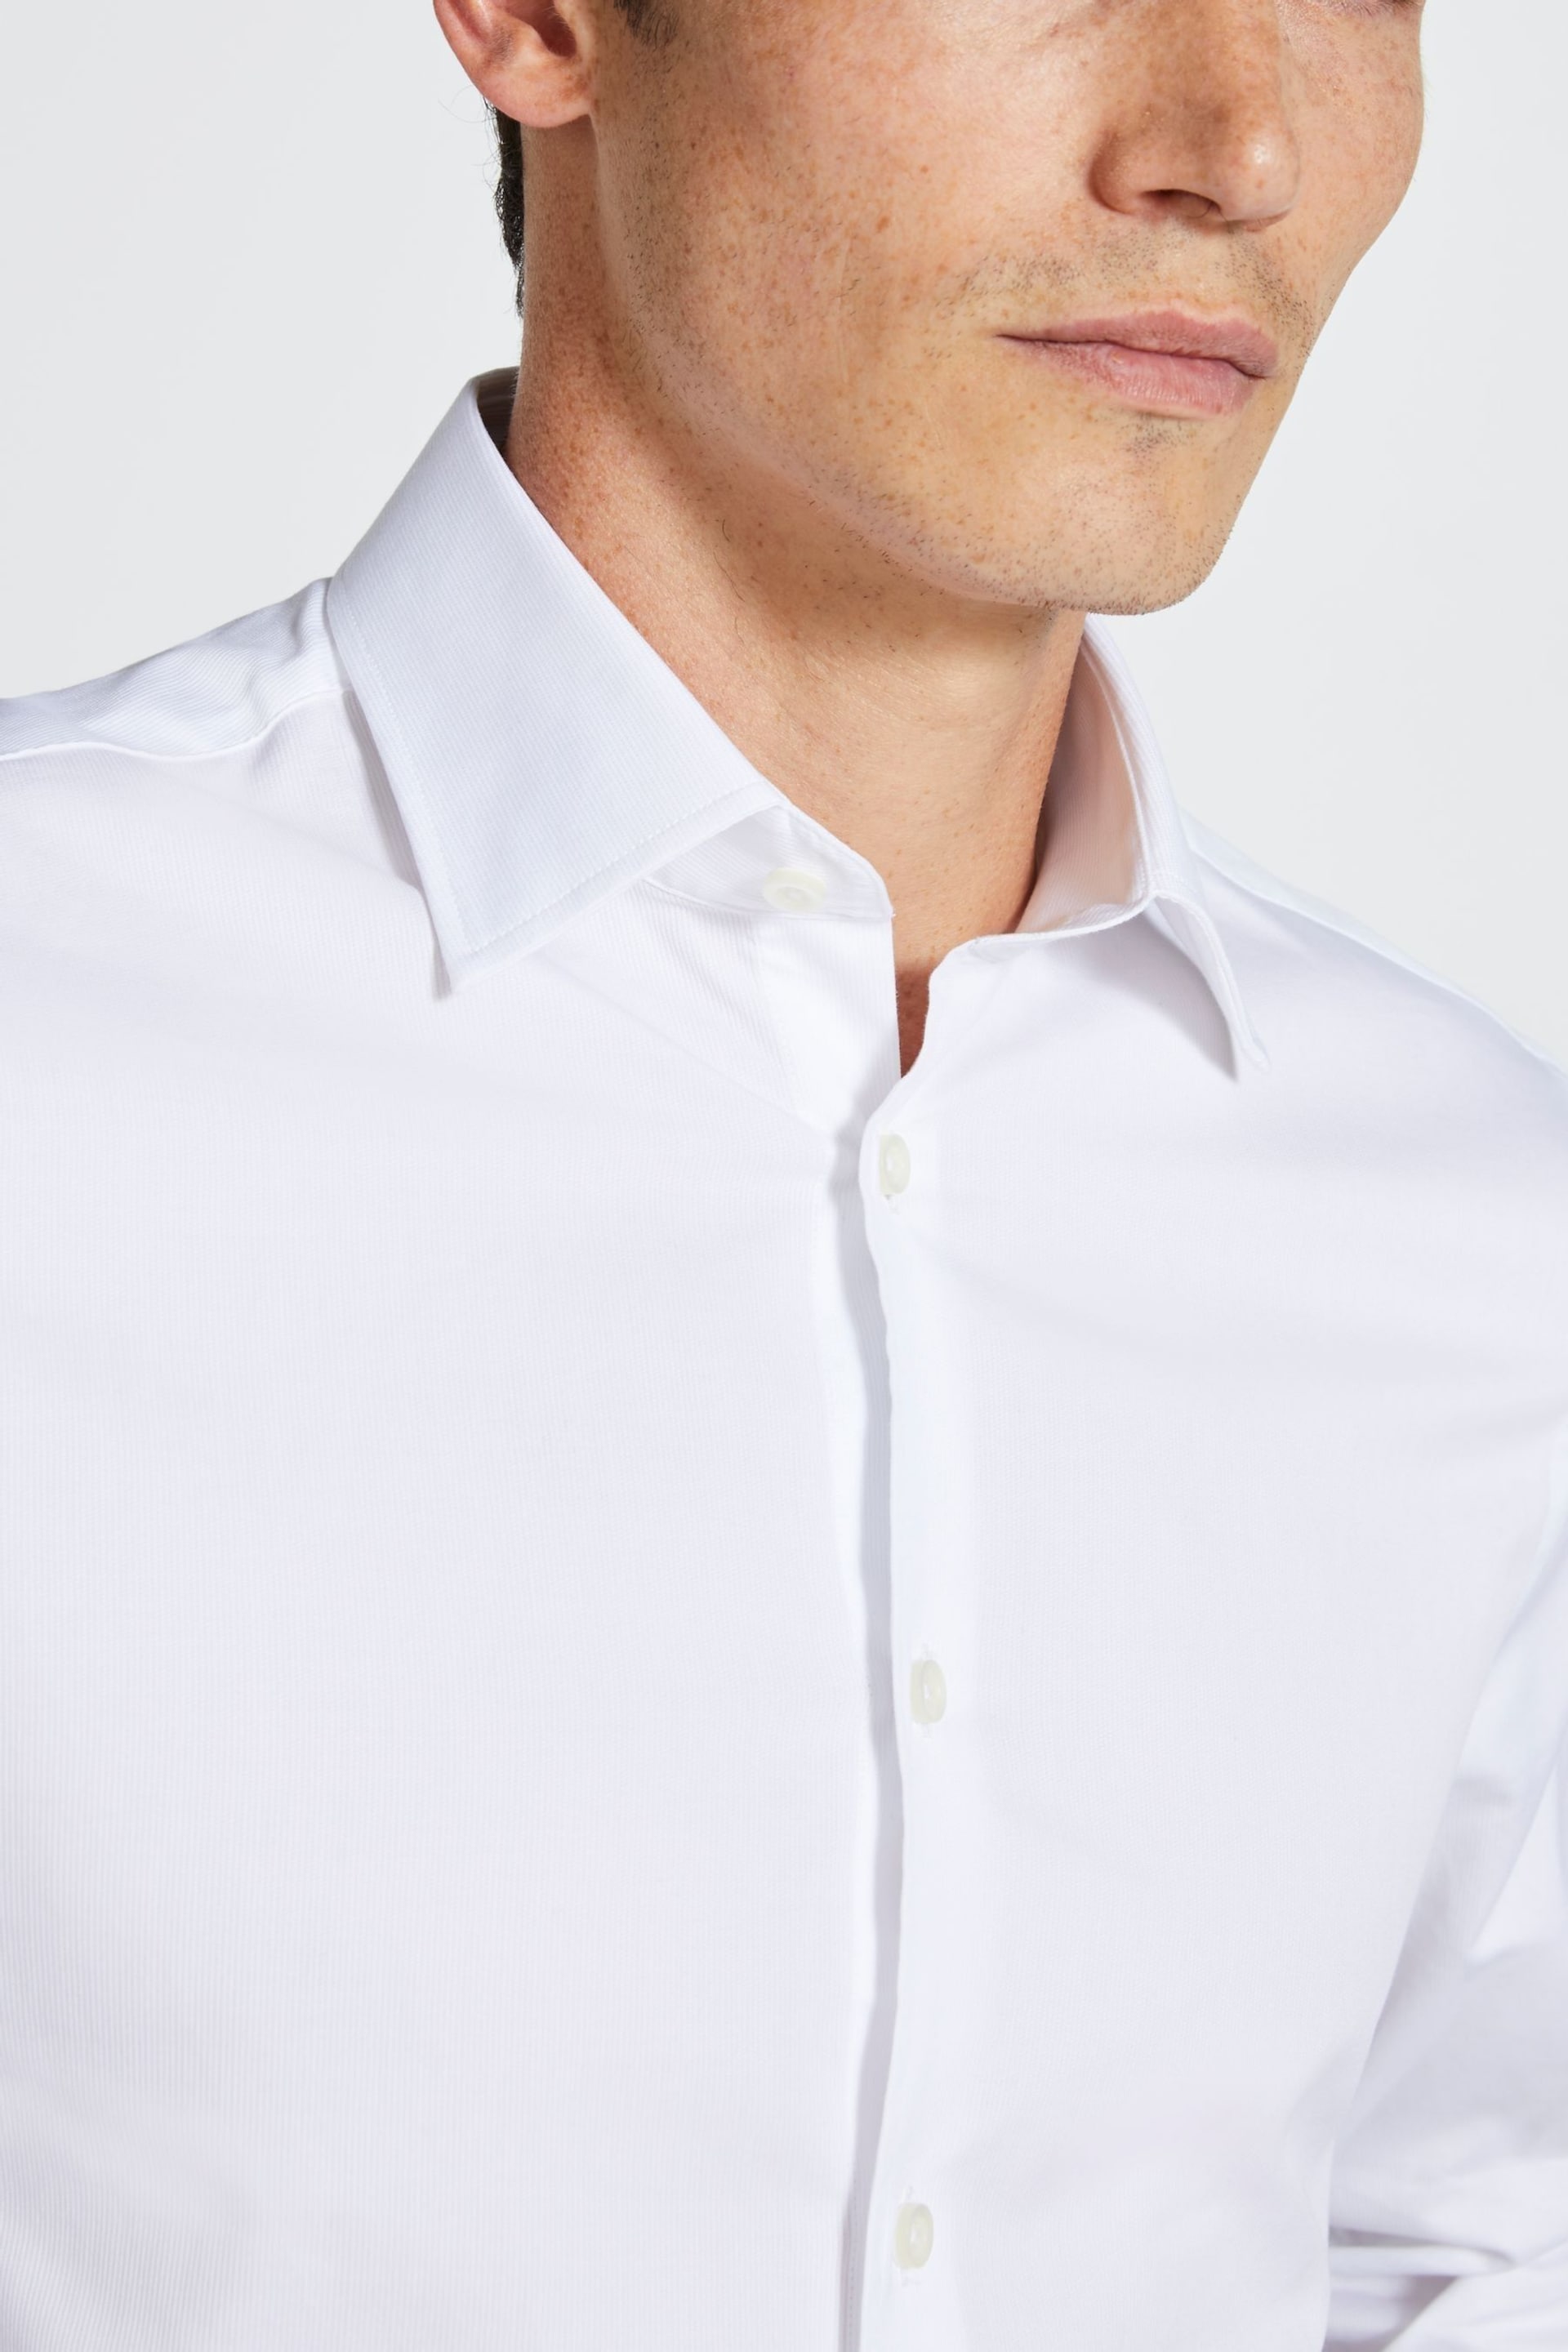 MOSS Tailored Fit Piquet Textured White Shirt - Image 2 of 3